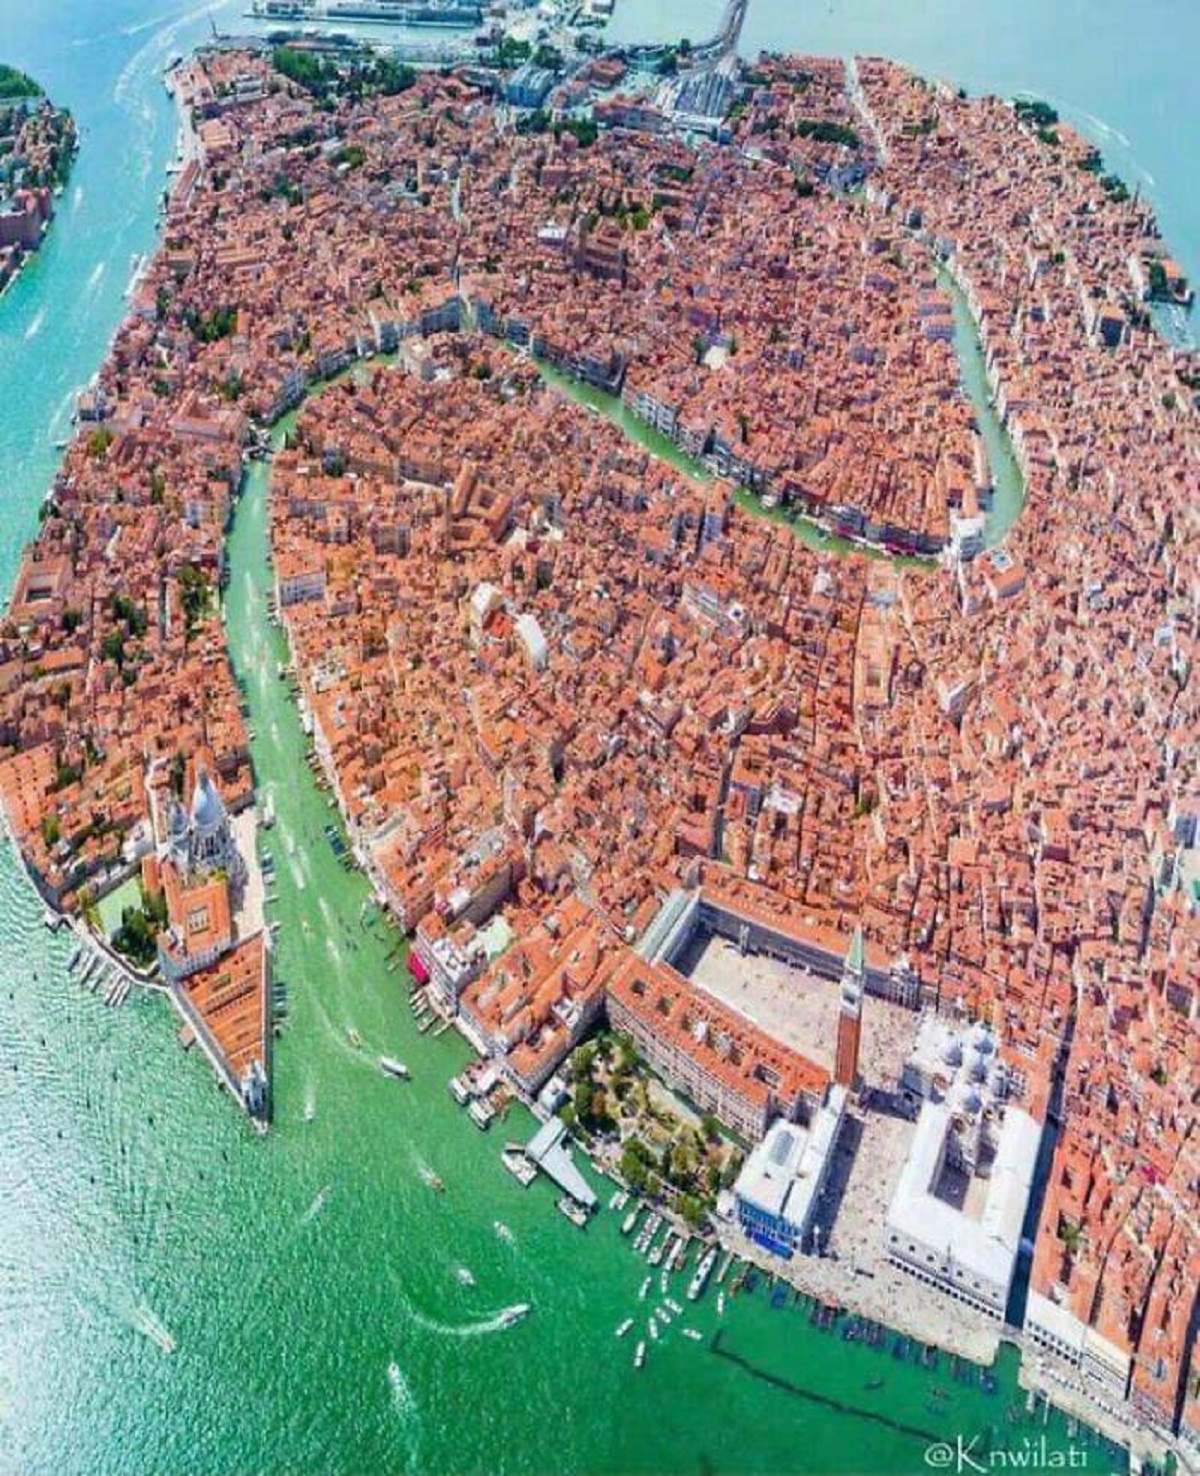 "Venice From Above"